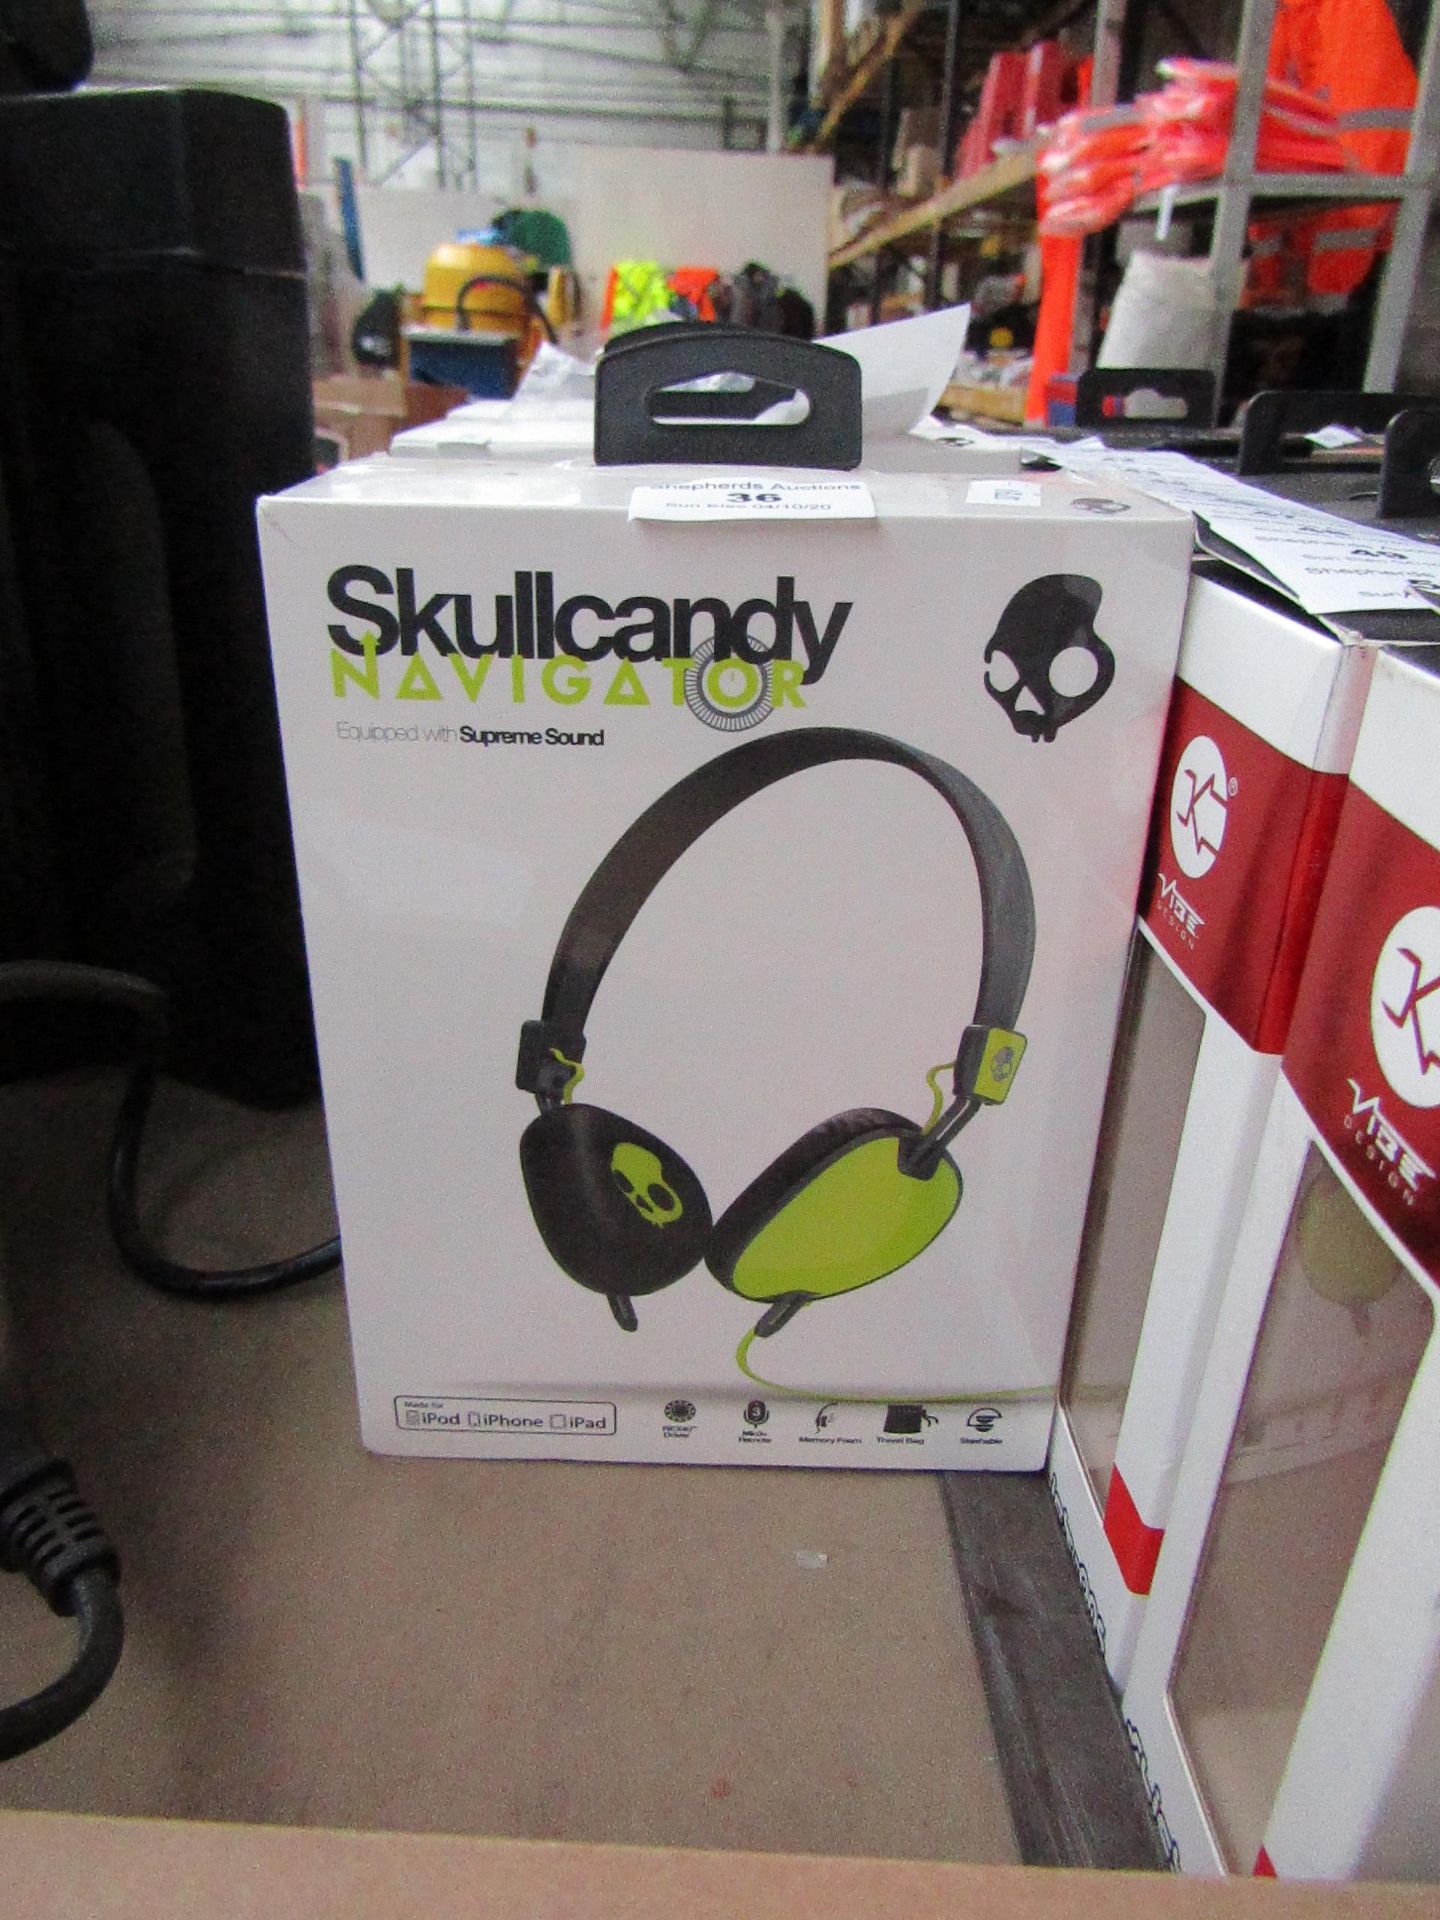 Skull Candy on ear headphones, brand new and boxed.